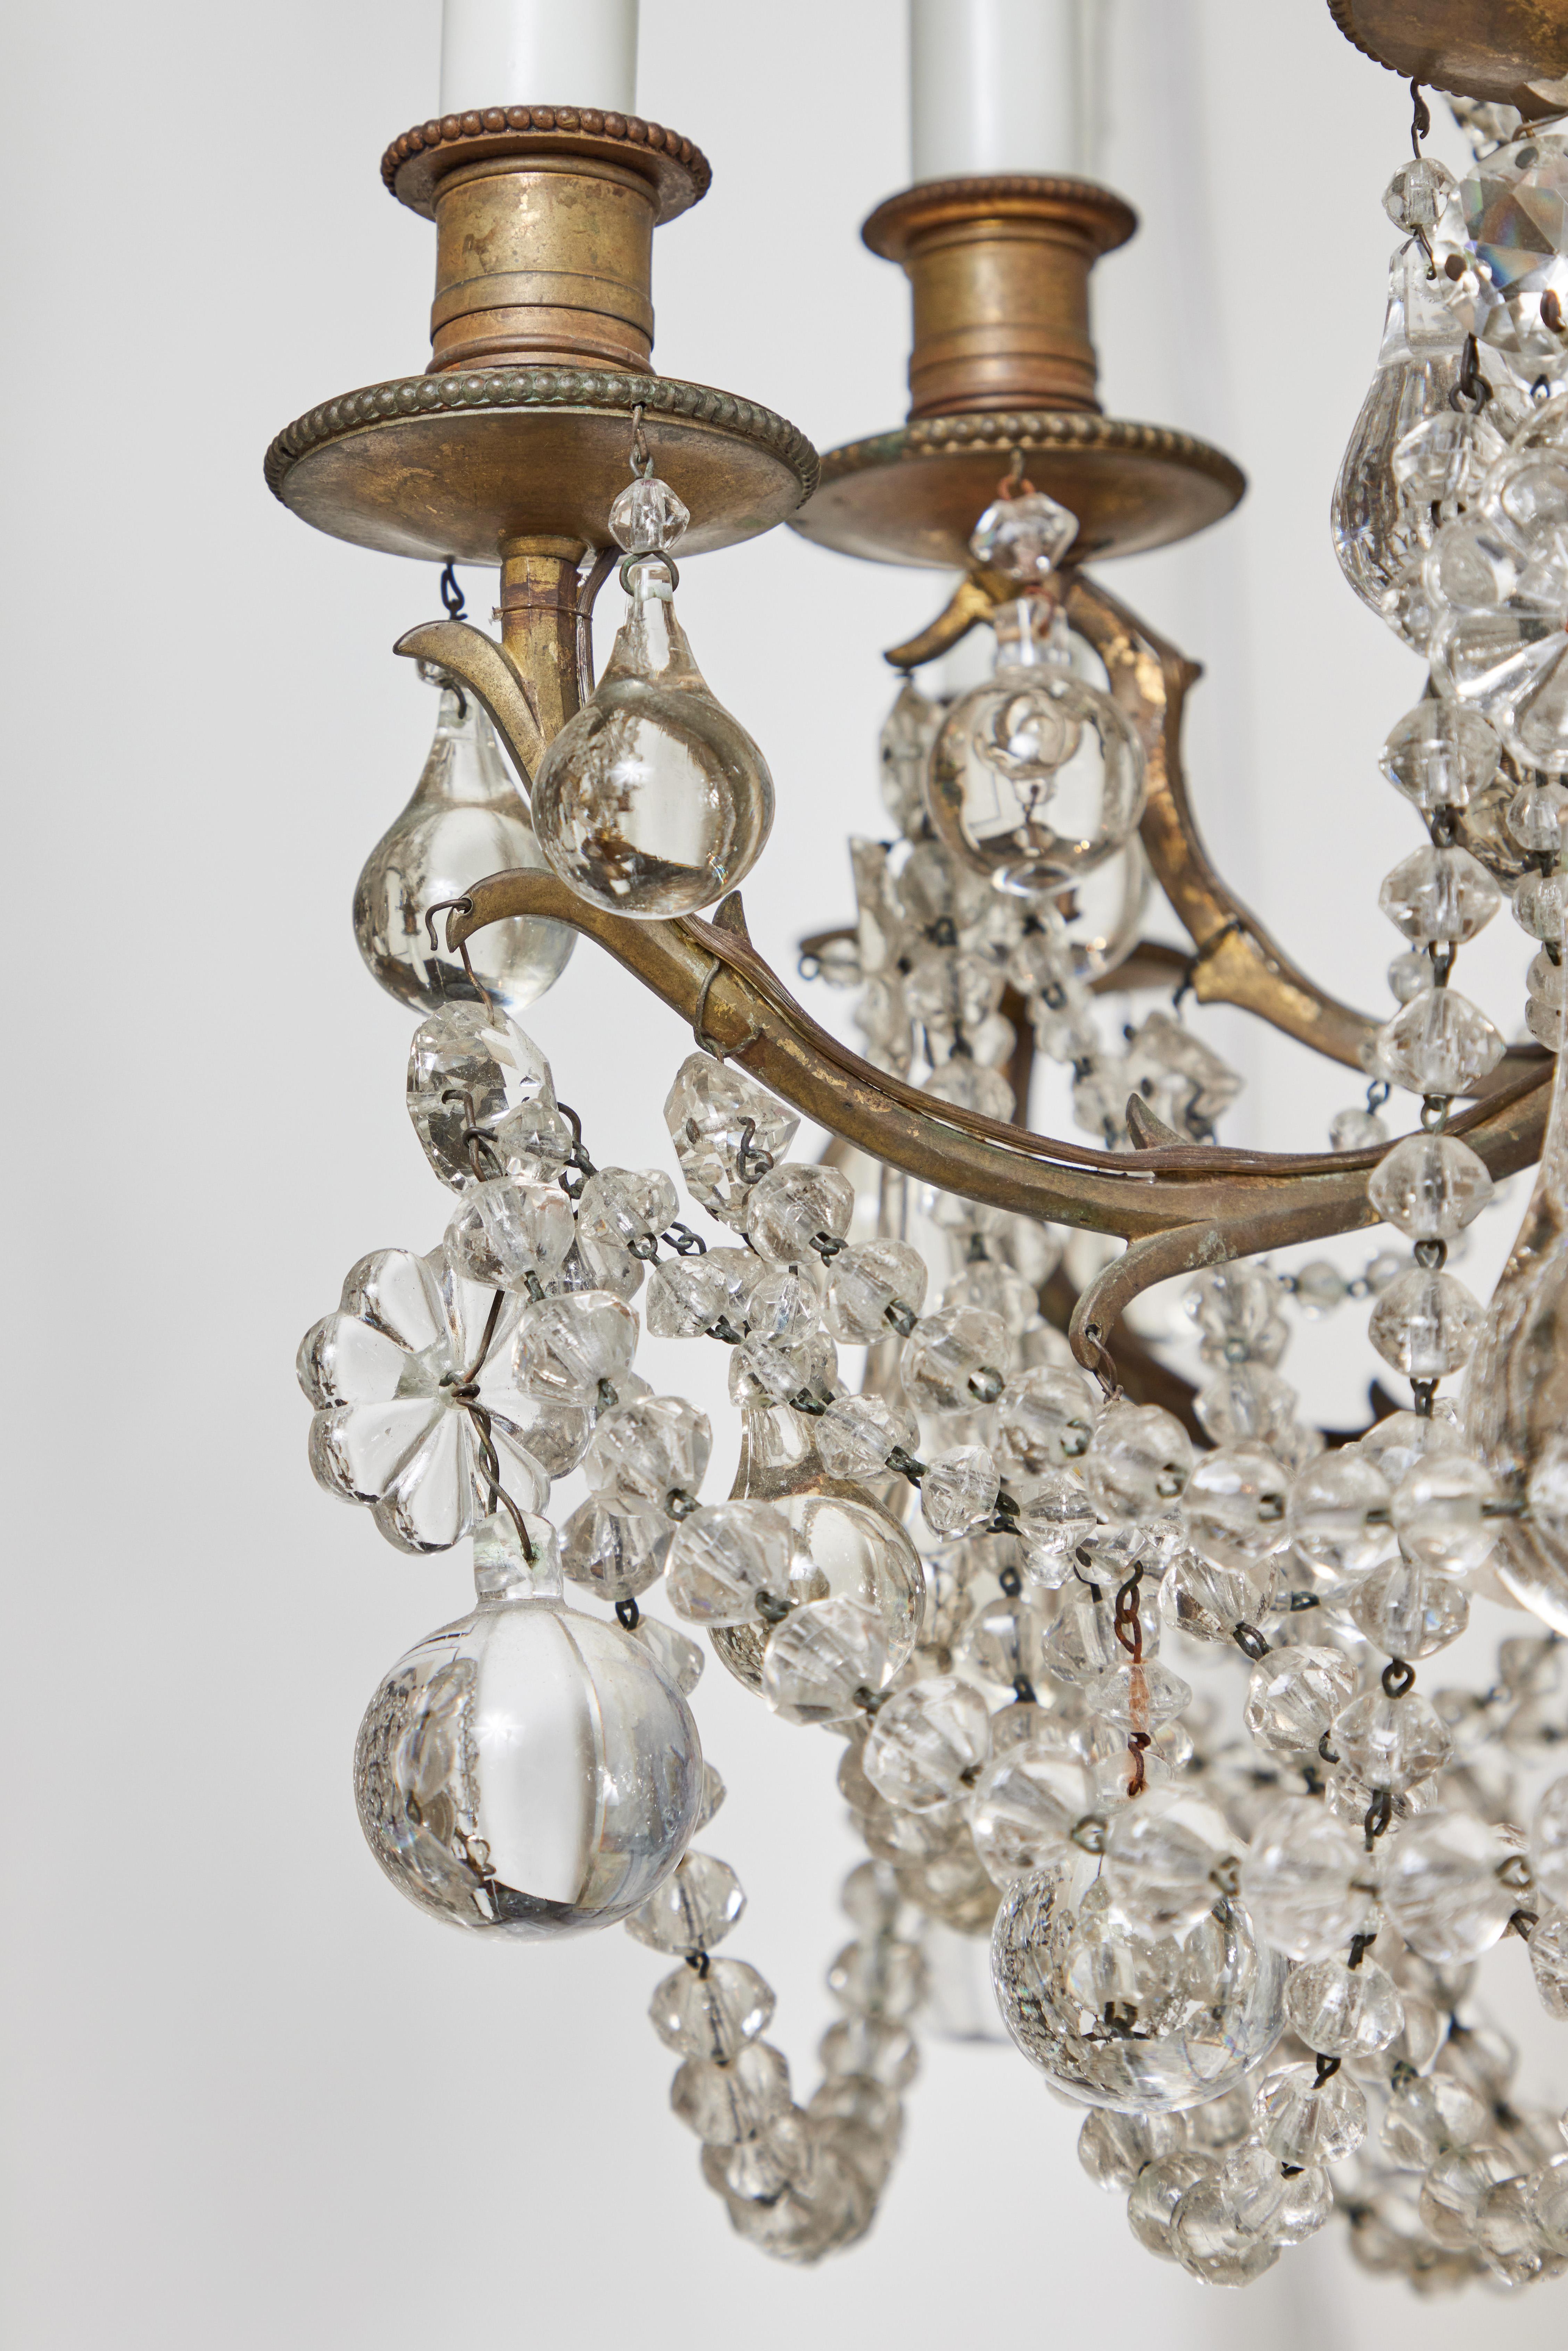 Absolutely charming, lush, c. 1920 Italian chandelier with a 12 light, gilt bronze carriage featuring branch-form arms. The whole filled with densely packed crystal swags and drops. Wired for U.S. current.